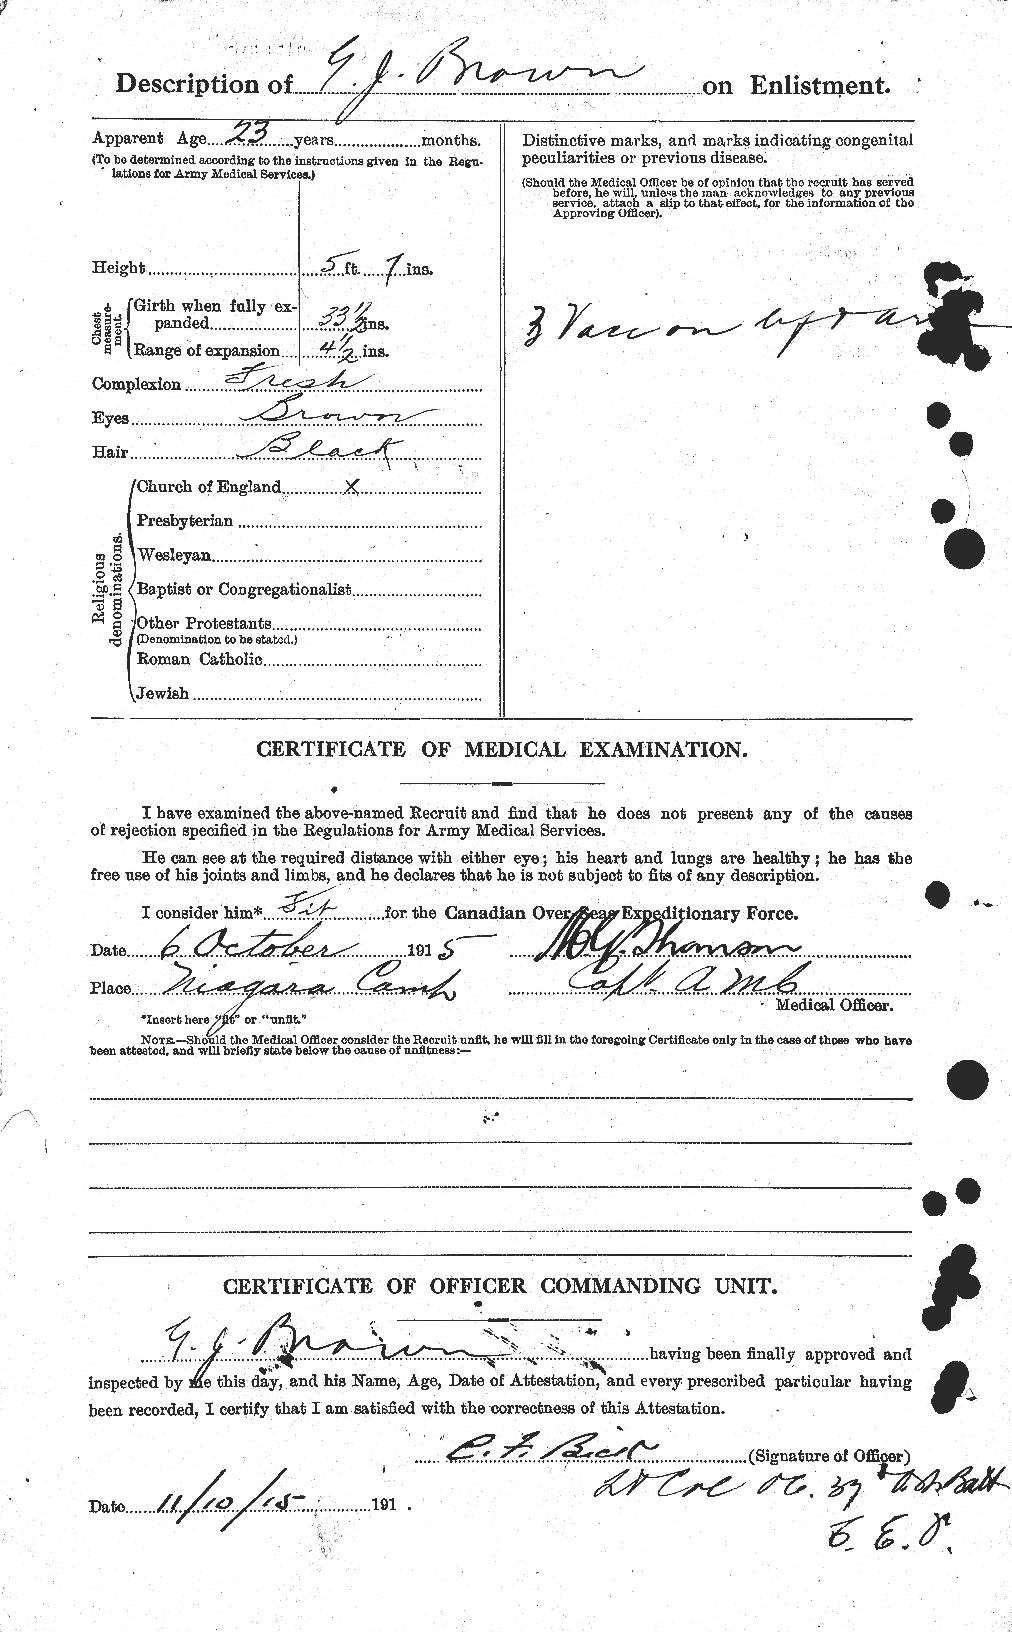 Personnel Records of the First World War - CEF 262605b